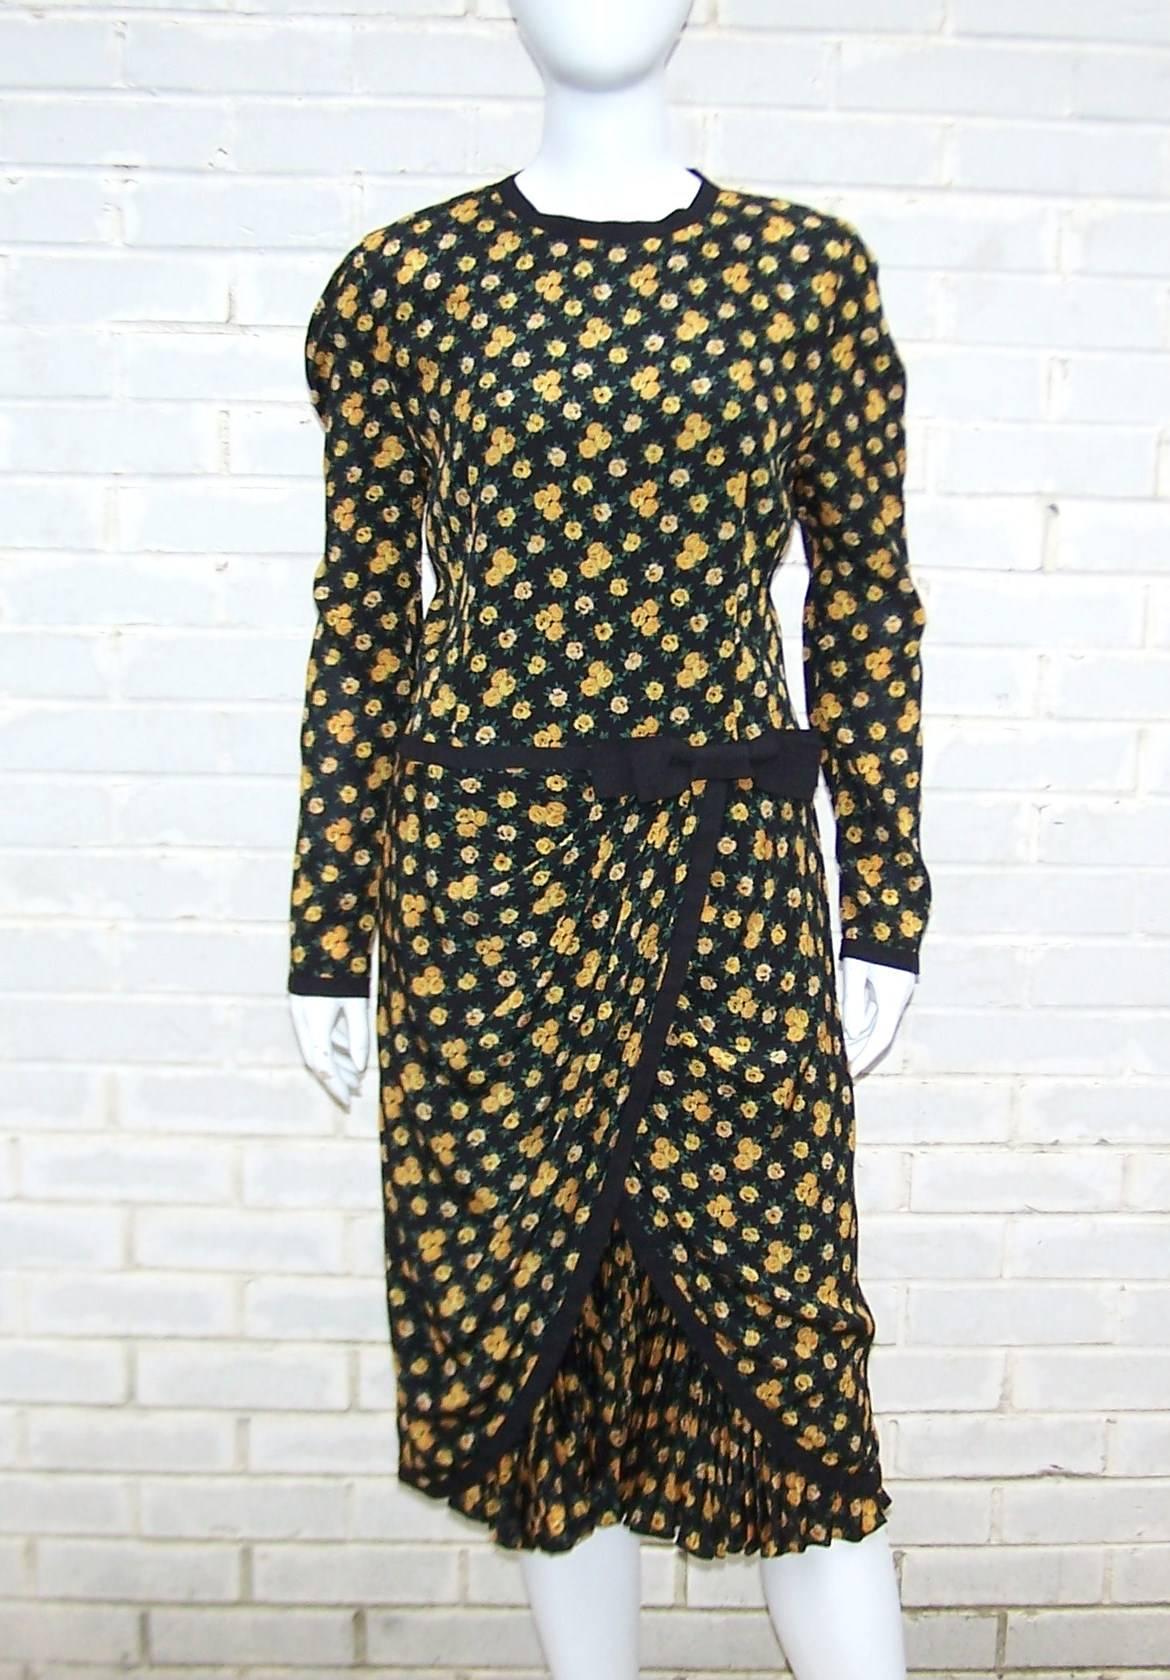 Louis Feraud's ladylike style gives way to girlish details in this dress from the 1980's.  The silk blend dark floral is a black background accented with yellow flowers and a touch of green foliage.  The waist drops to a softly pleated hip line